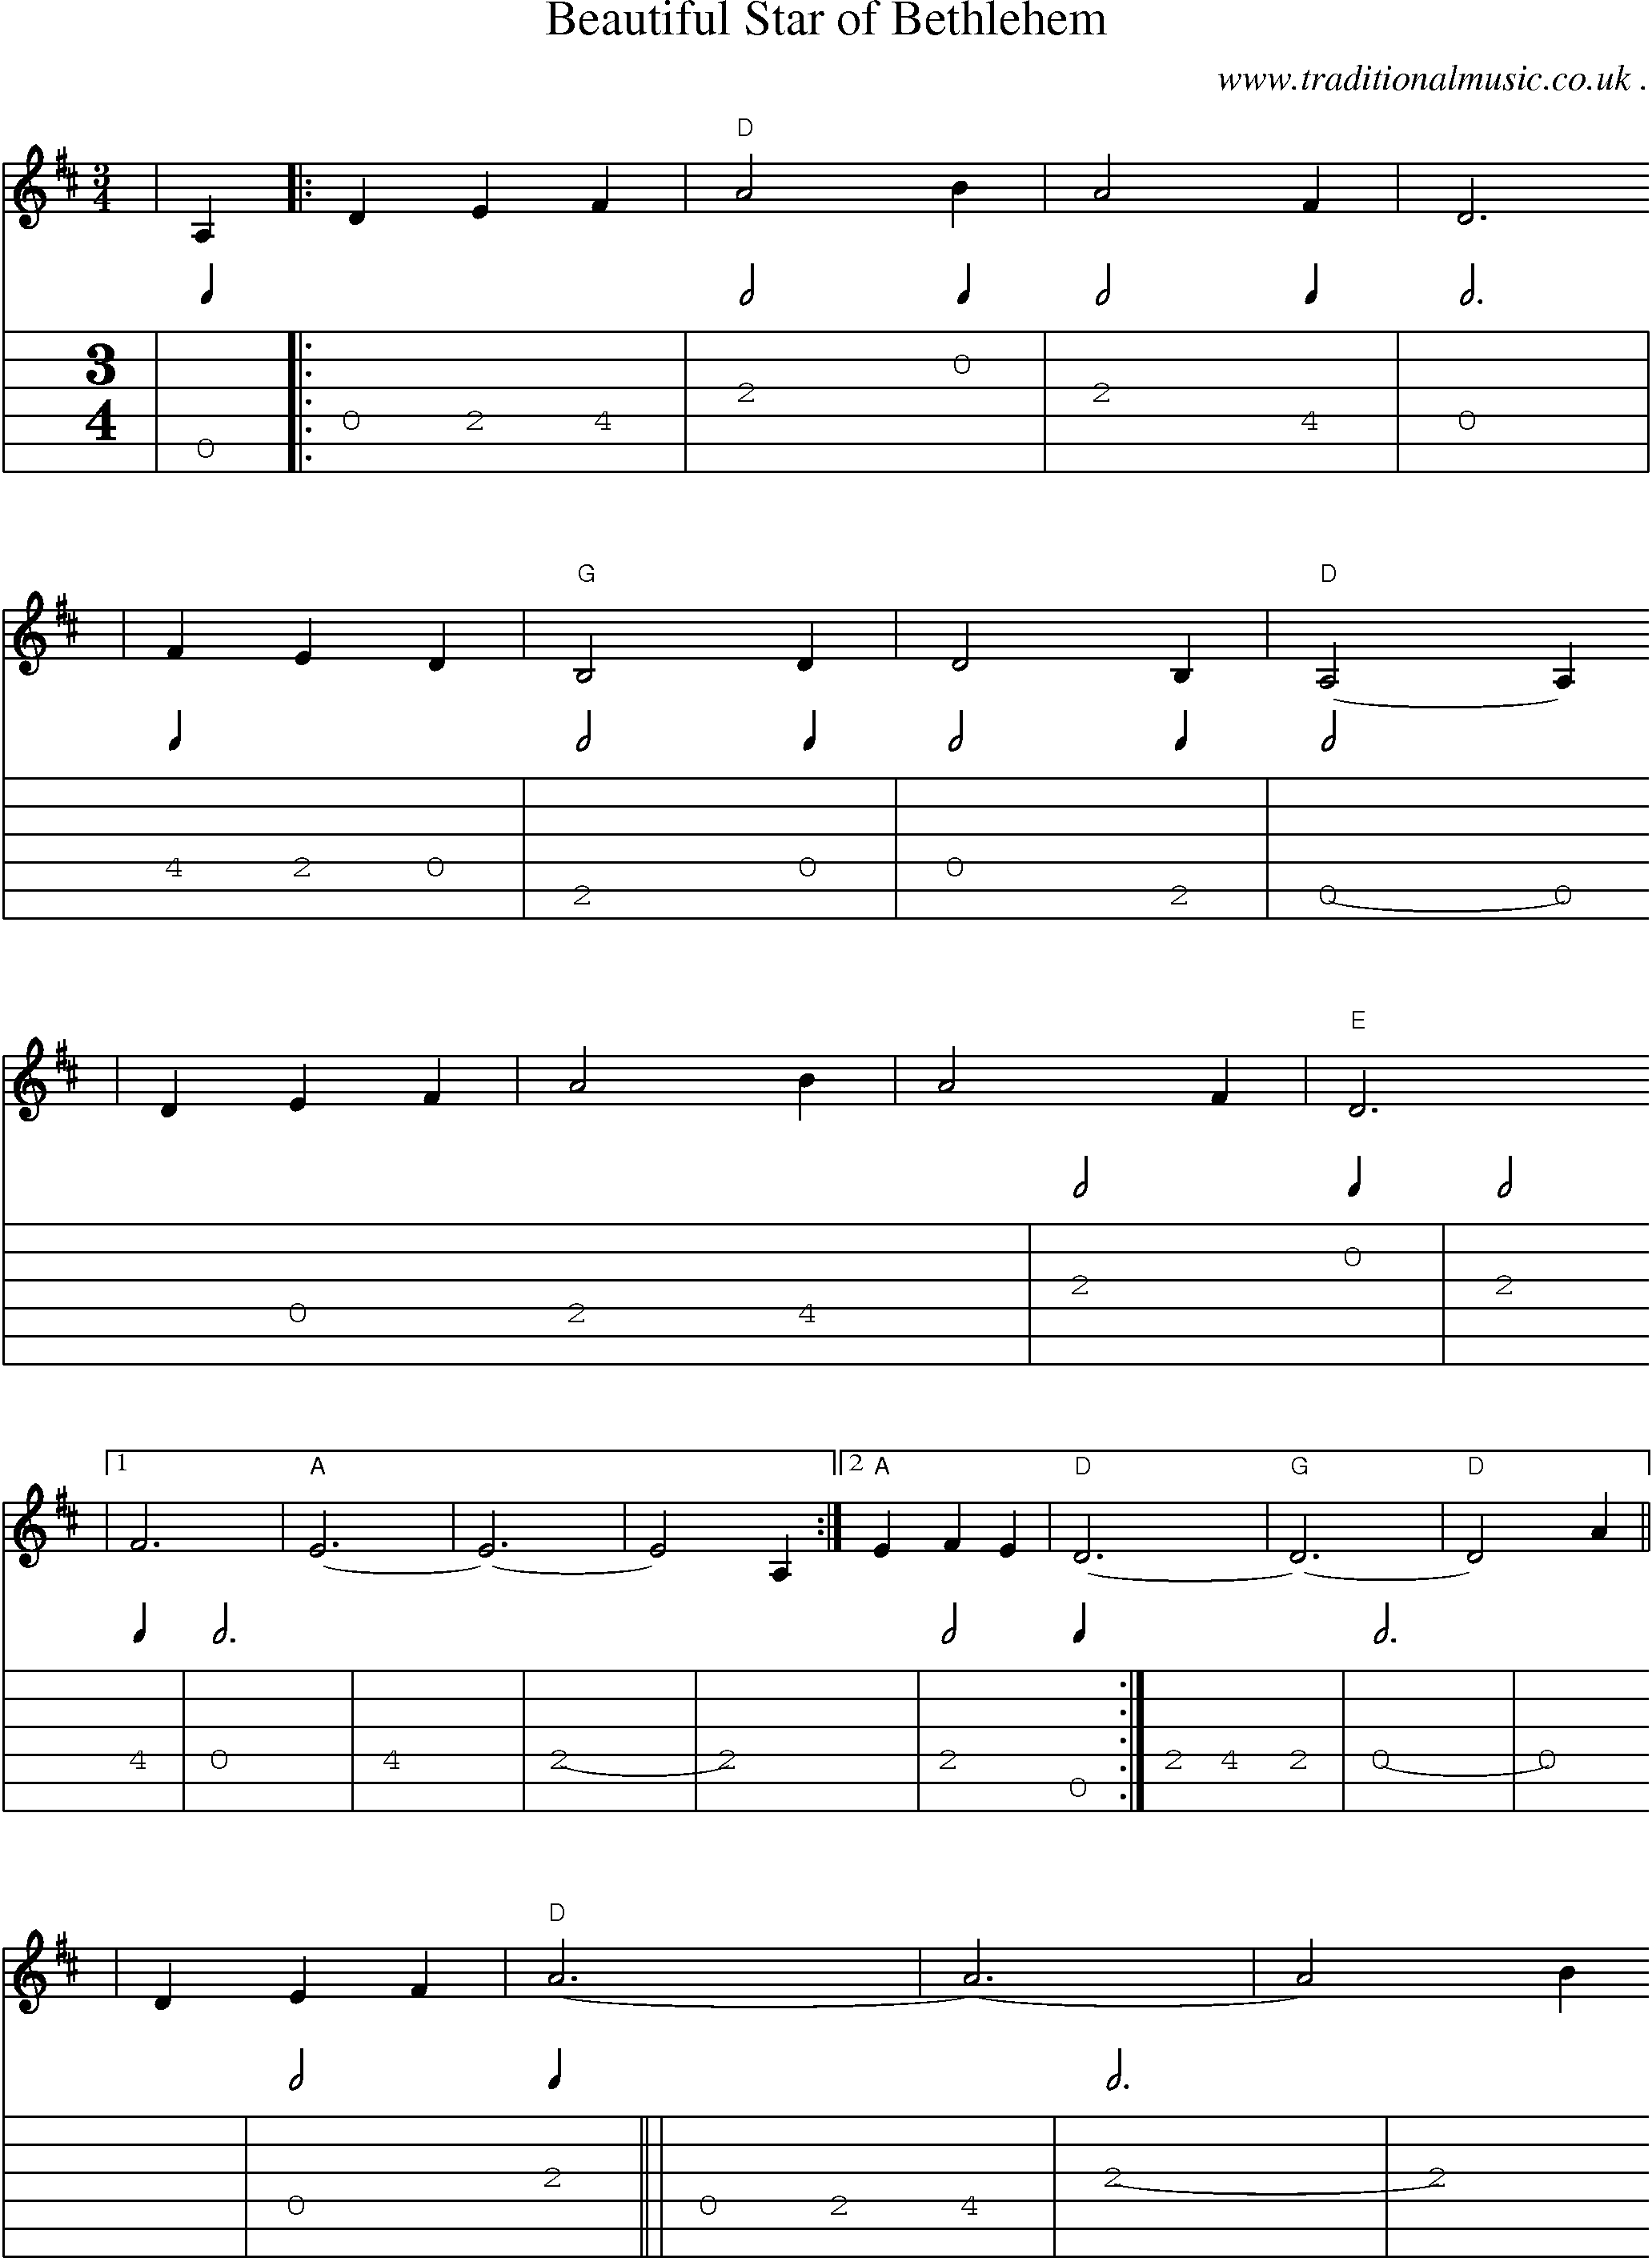 Music Score and Guitar Tabs for Beautiful Star Of Bethlehem